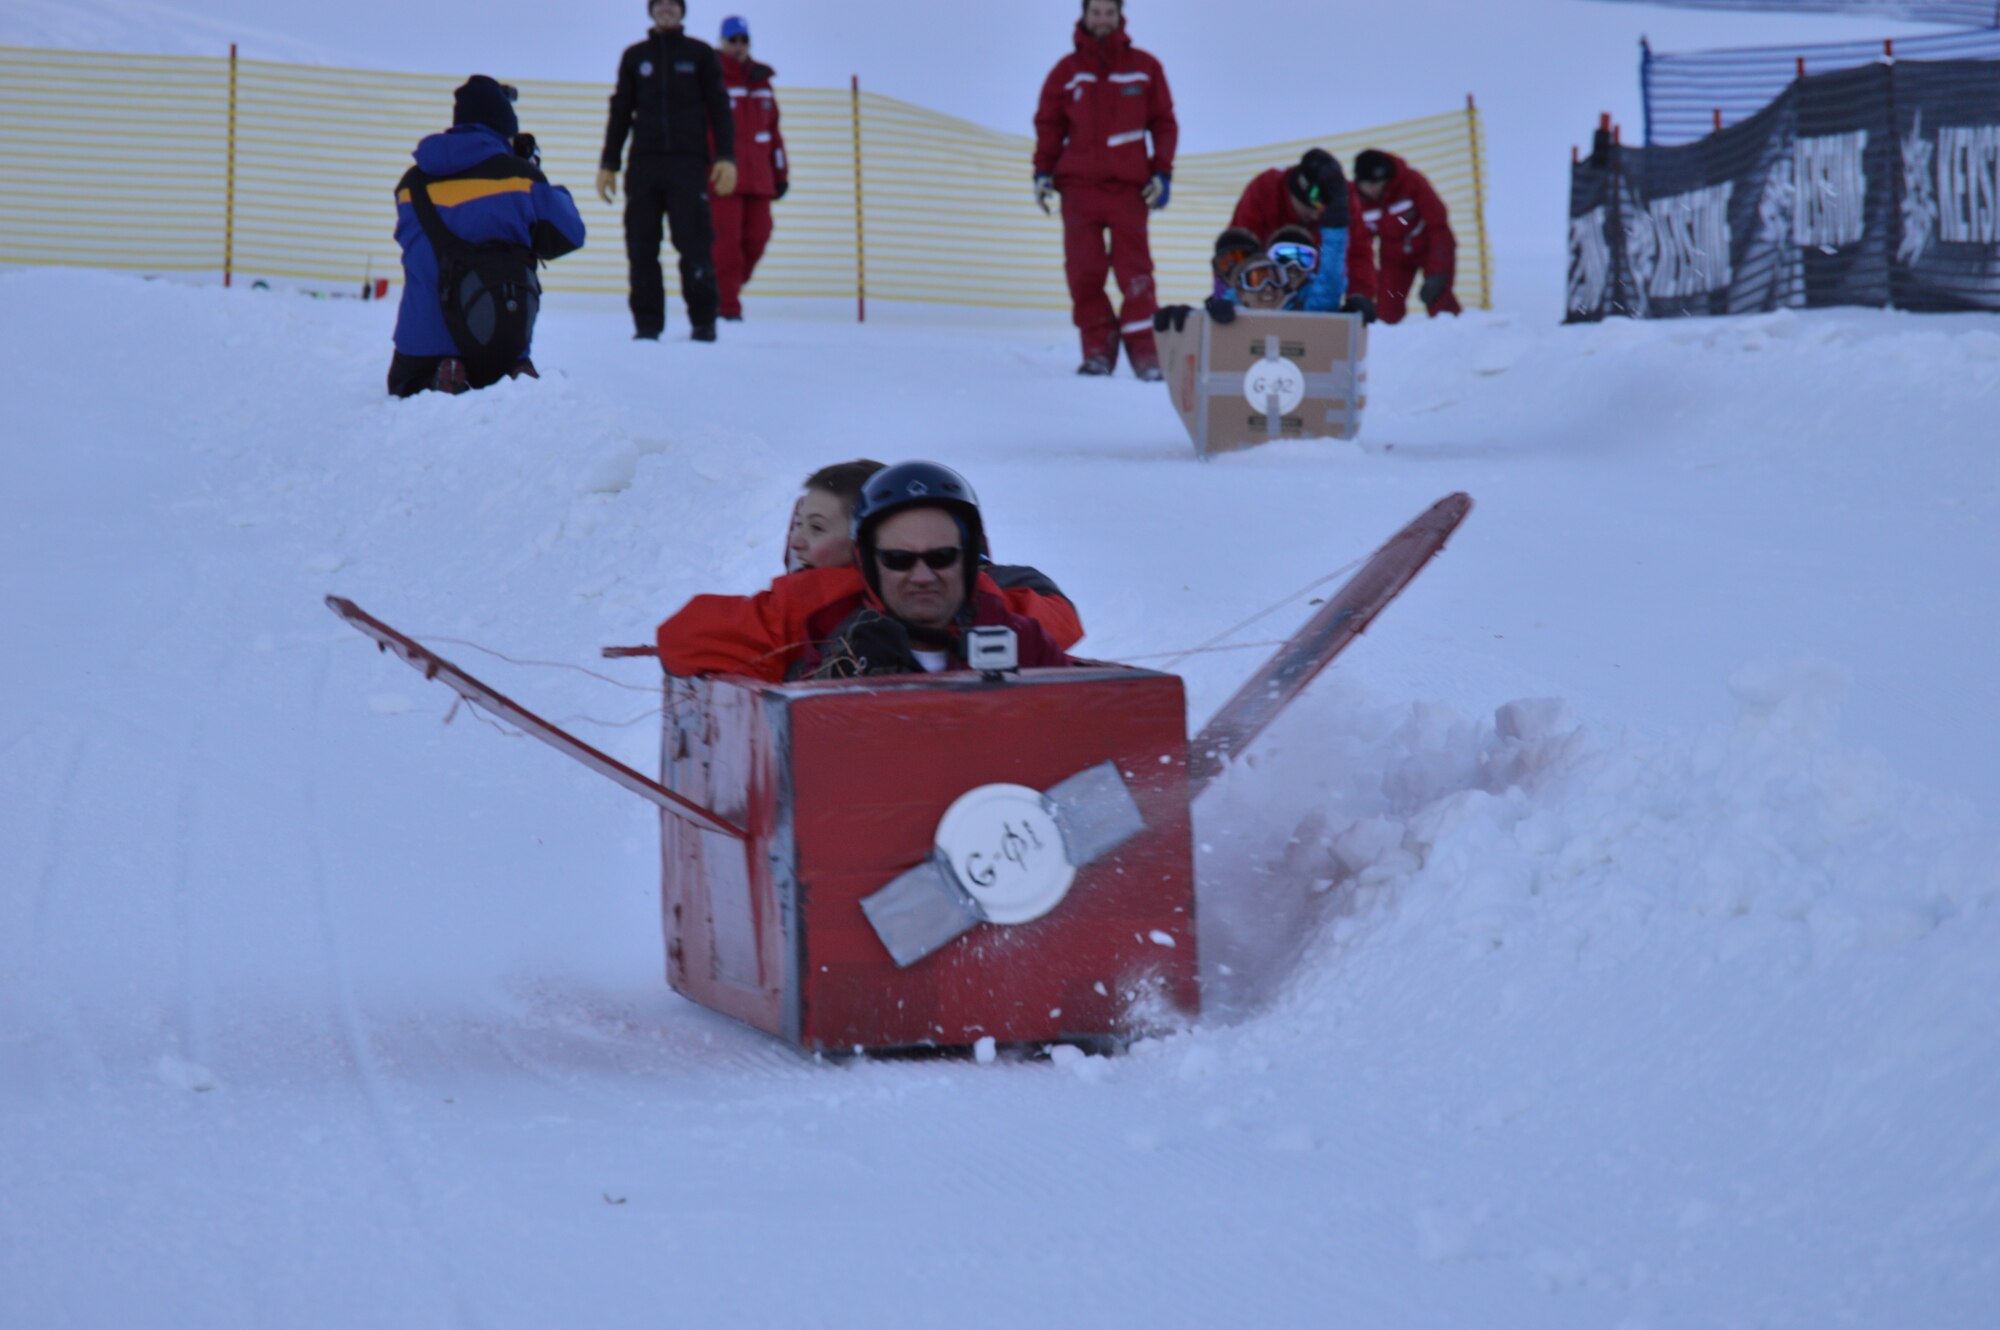 Col. David Gibson and Grant Sparkman slide down the cardboard derby race course Jan. 25 during the 24th annual SnoFest. The team from the Academy Dean of Faculty's computer science department took first place in the group category for fastest snow craft. (U.S. Air Force Photo/Patrice Clarke)